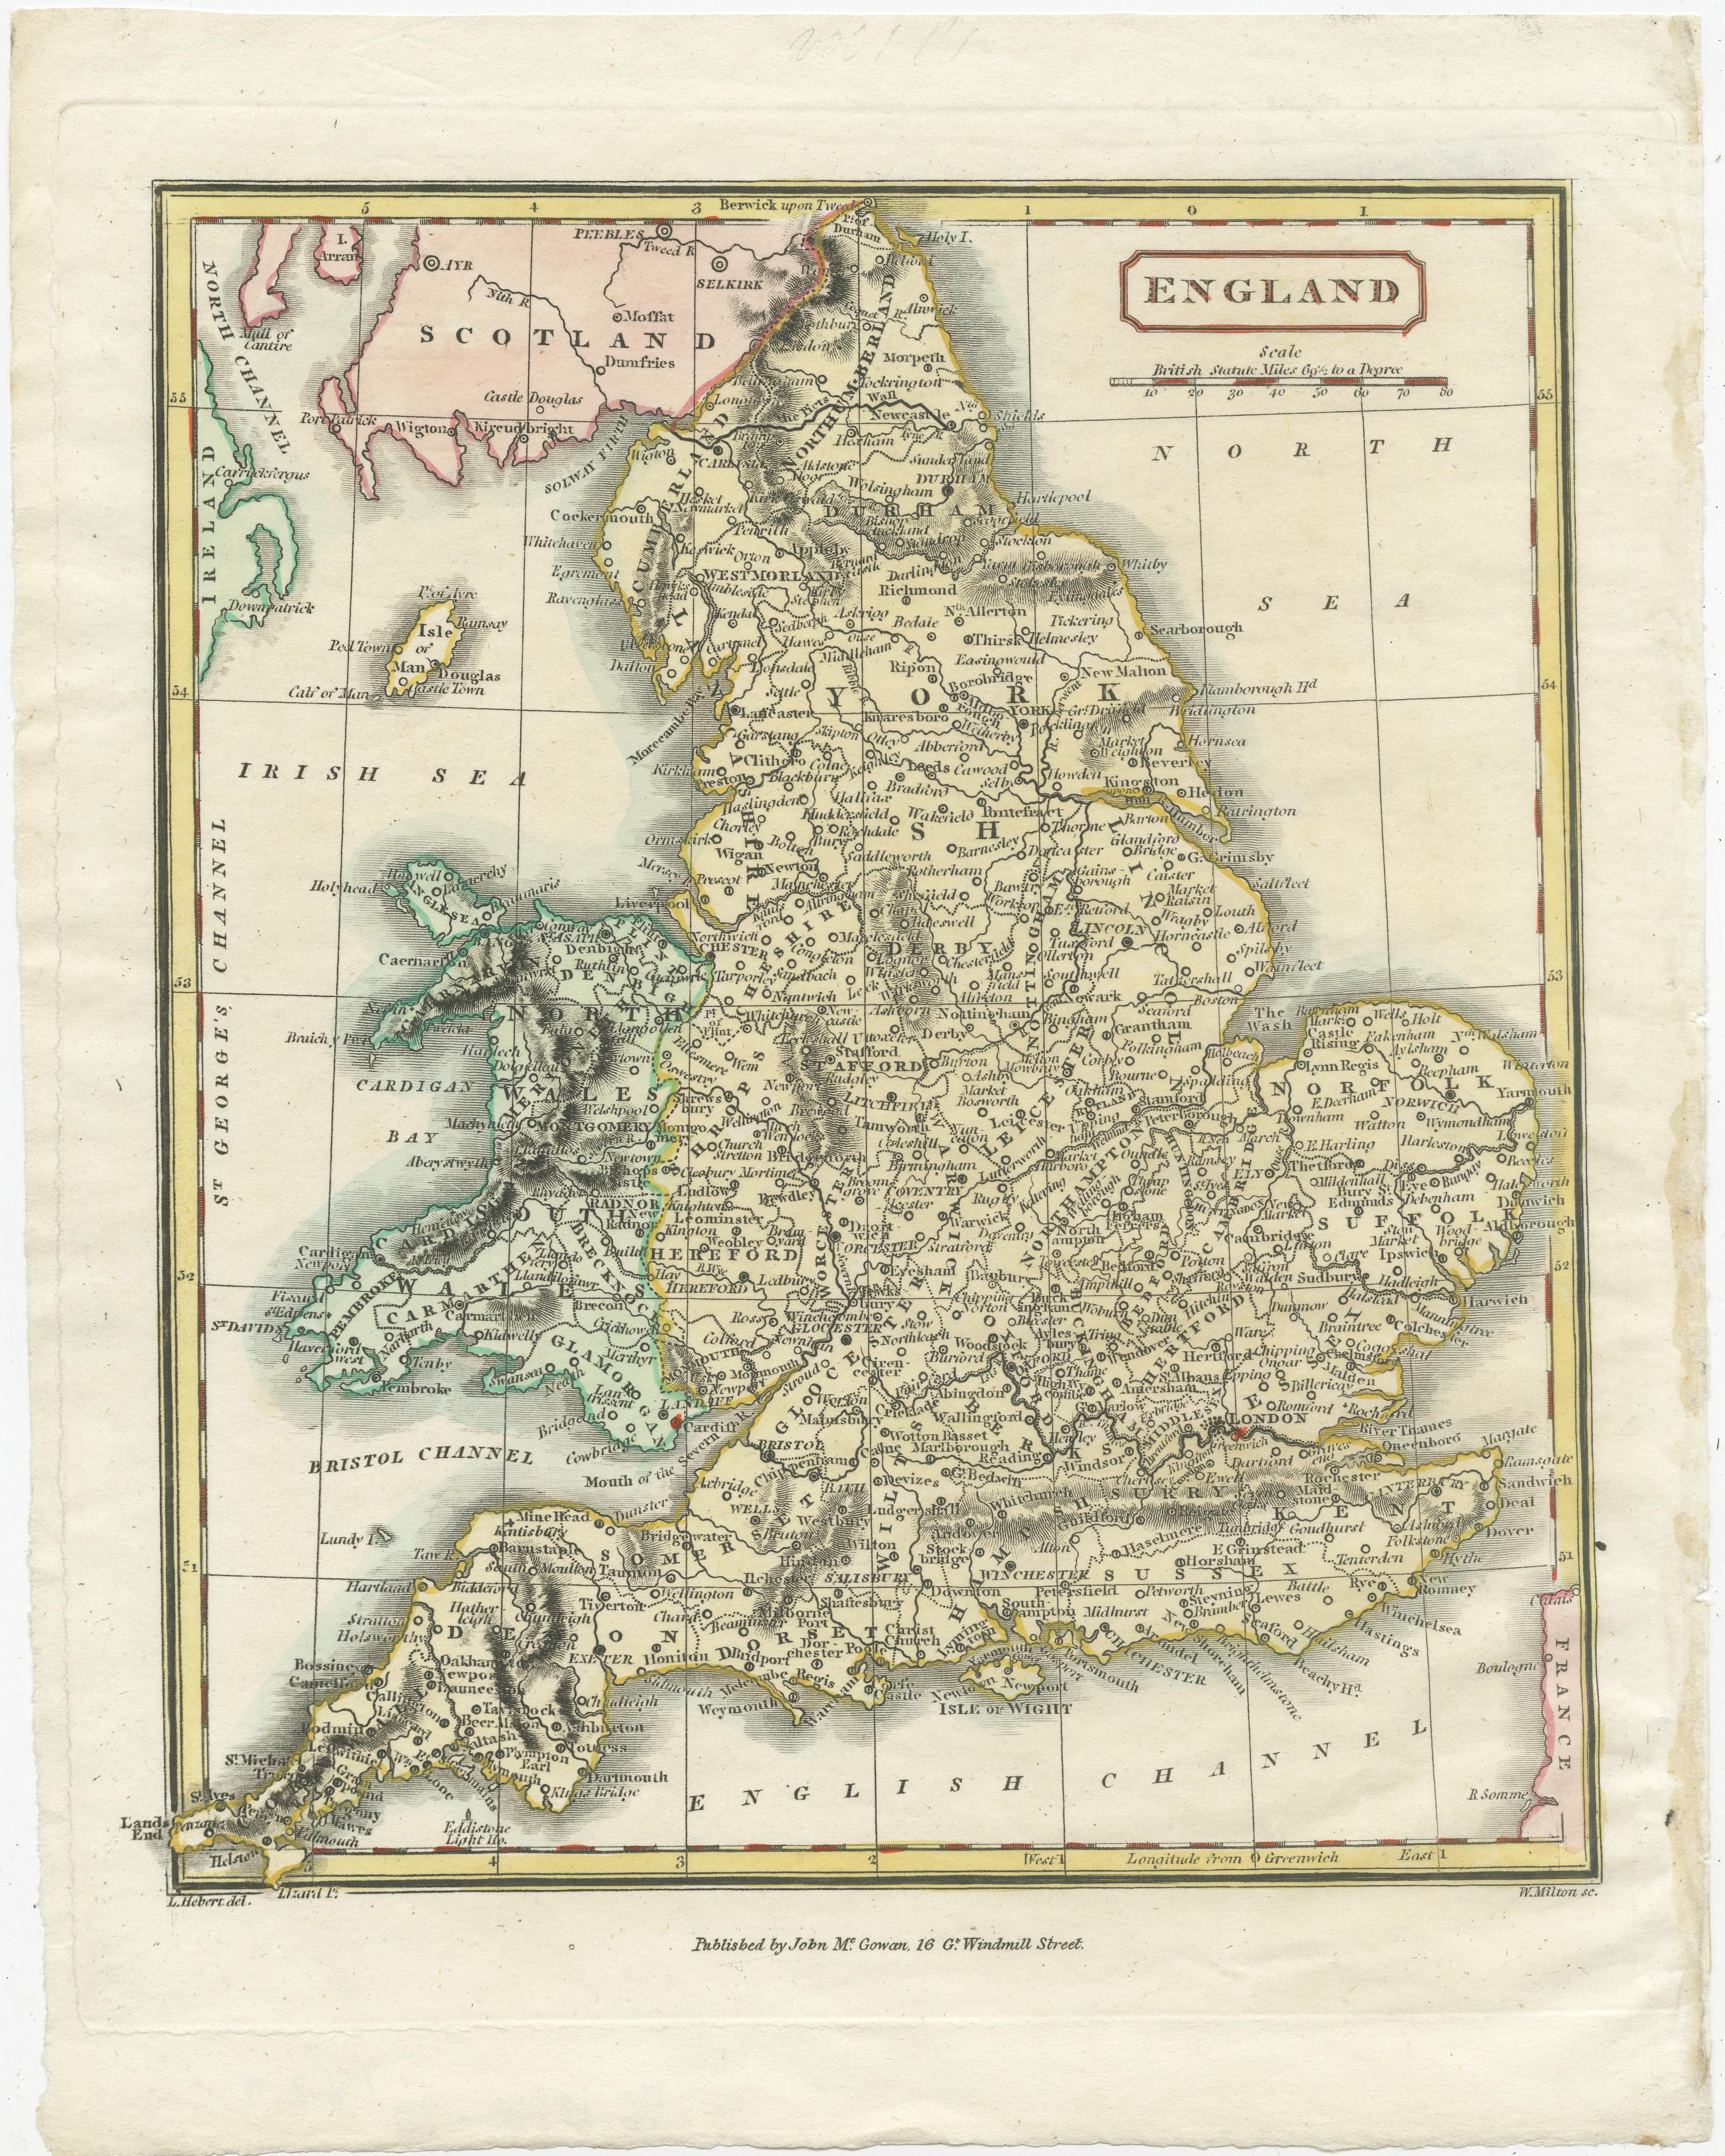 Antique map titled 'Engand'. Original old map of England. Engraved by W. Milton. Published by John Mc. Gowan, circa 1829.